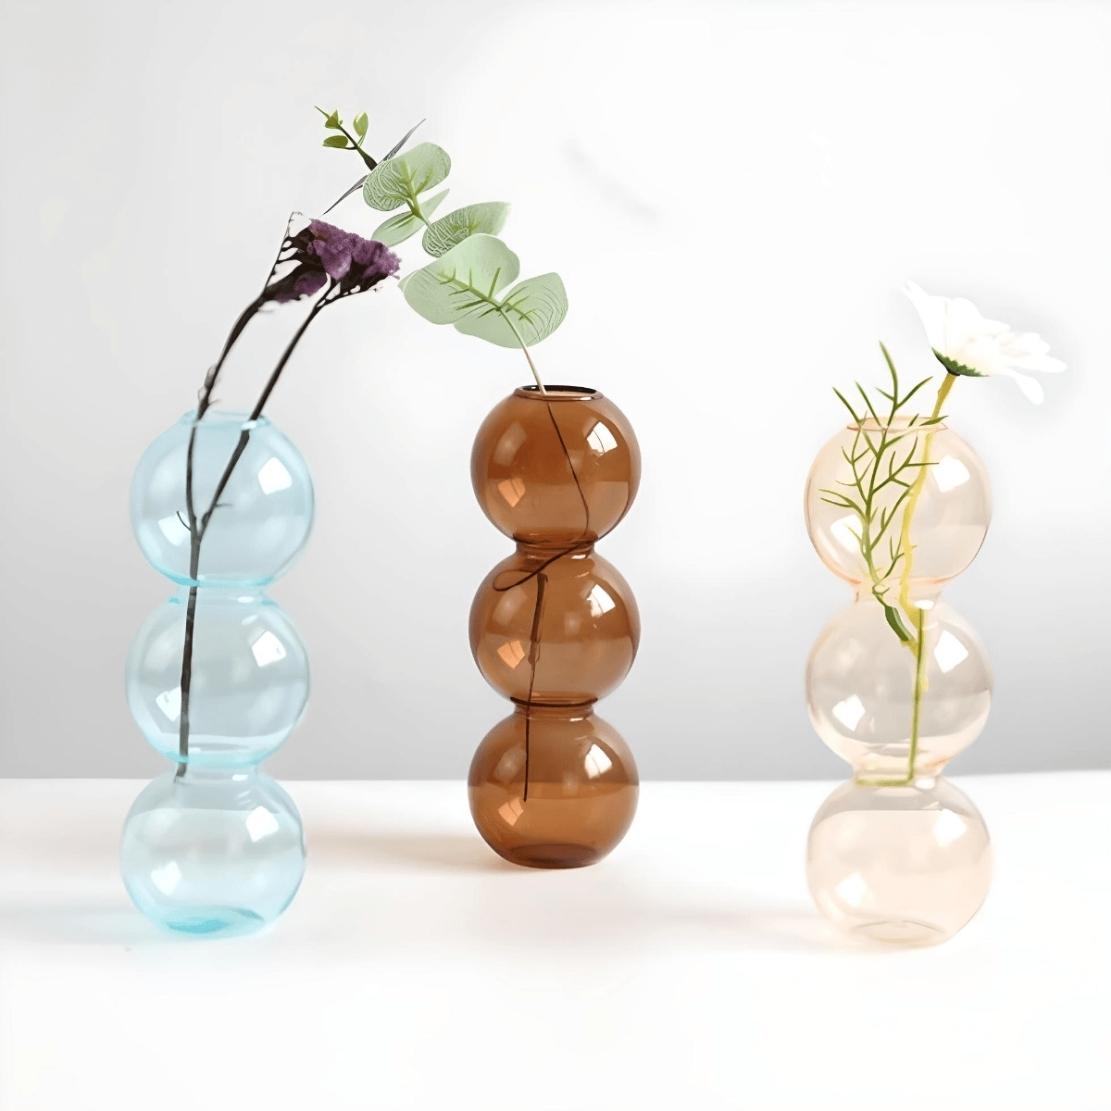 Blue, brown & yellow layered glass ball vases